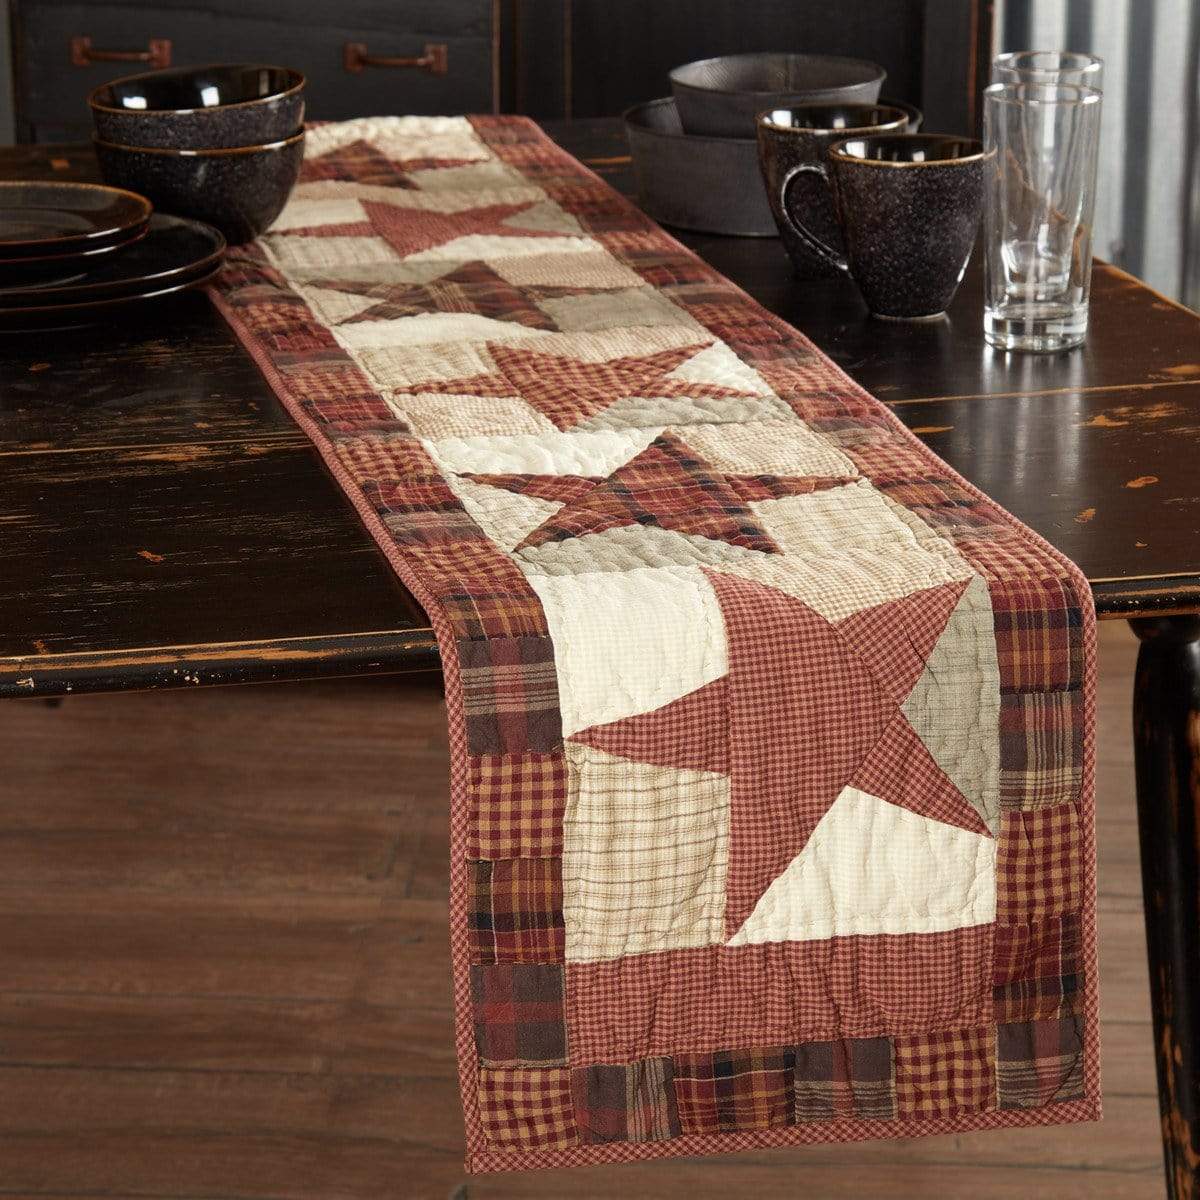 Rustic Western Linens and Decor - Retro Barn Country Linens